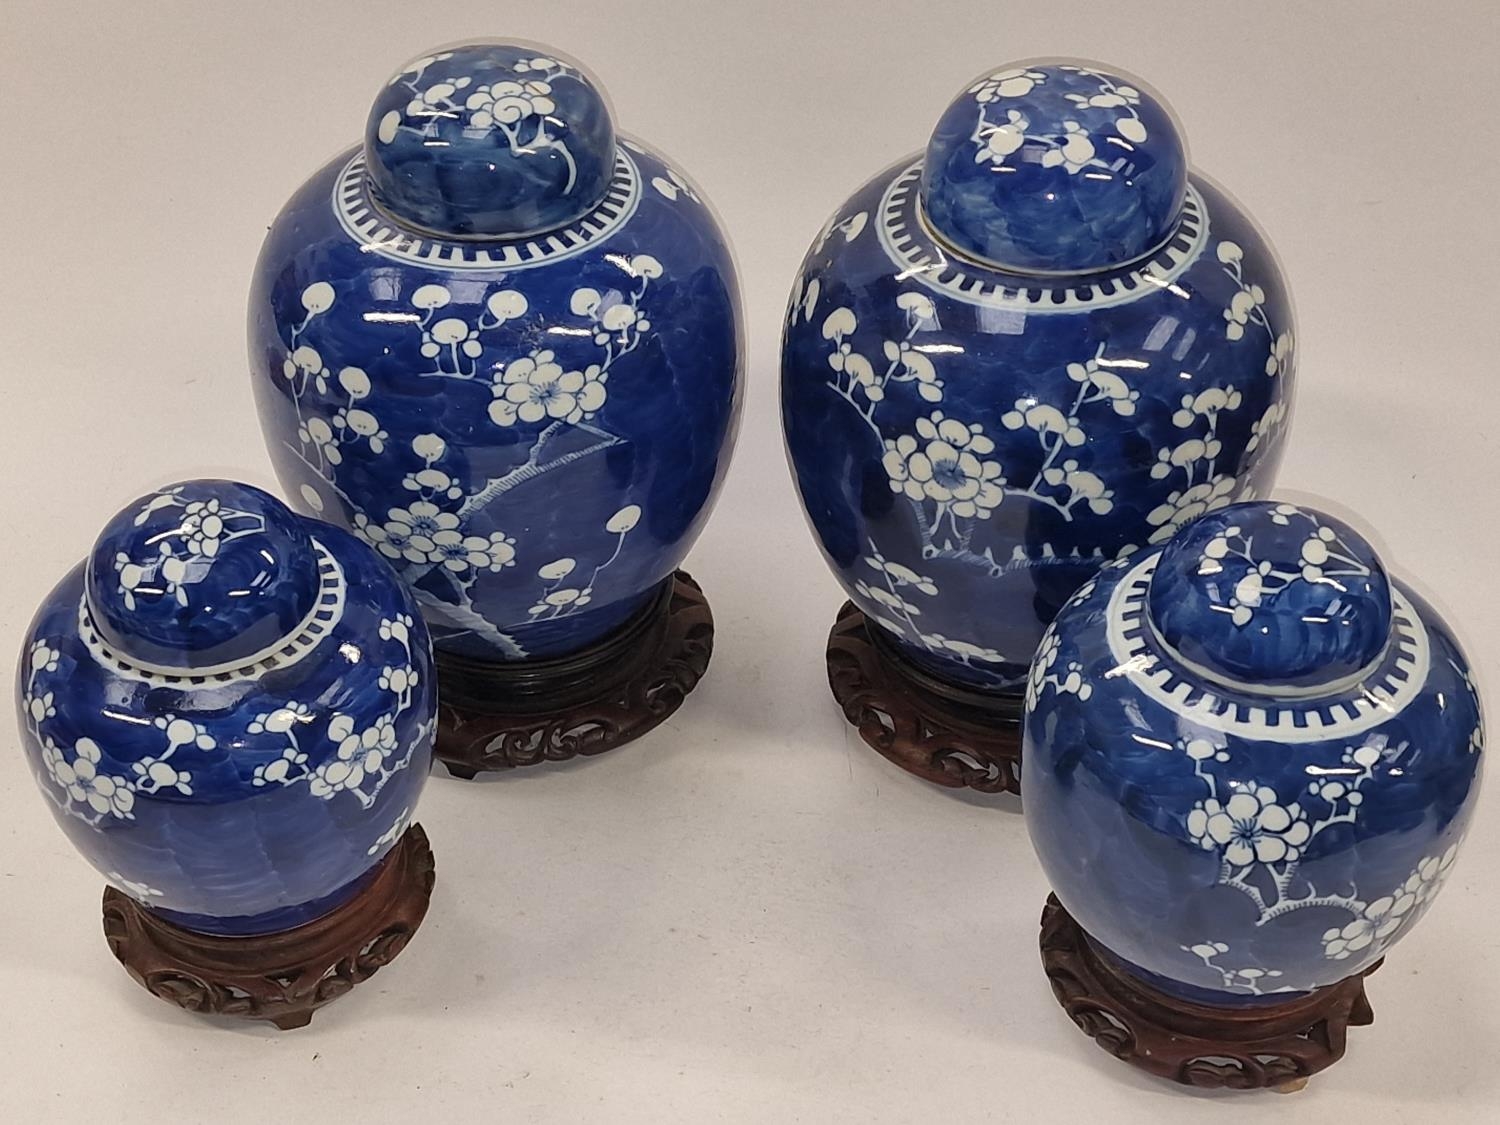 Two pairs of blue and white Chinese ginger jars on wooden stands (one lid af). - Image 2 of 3